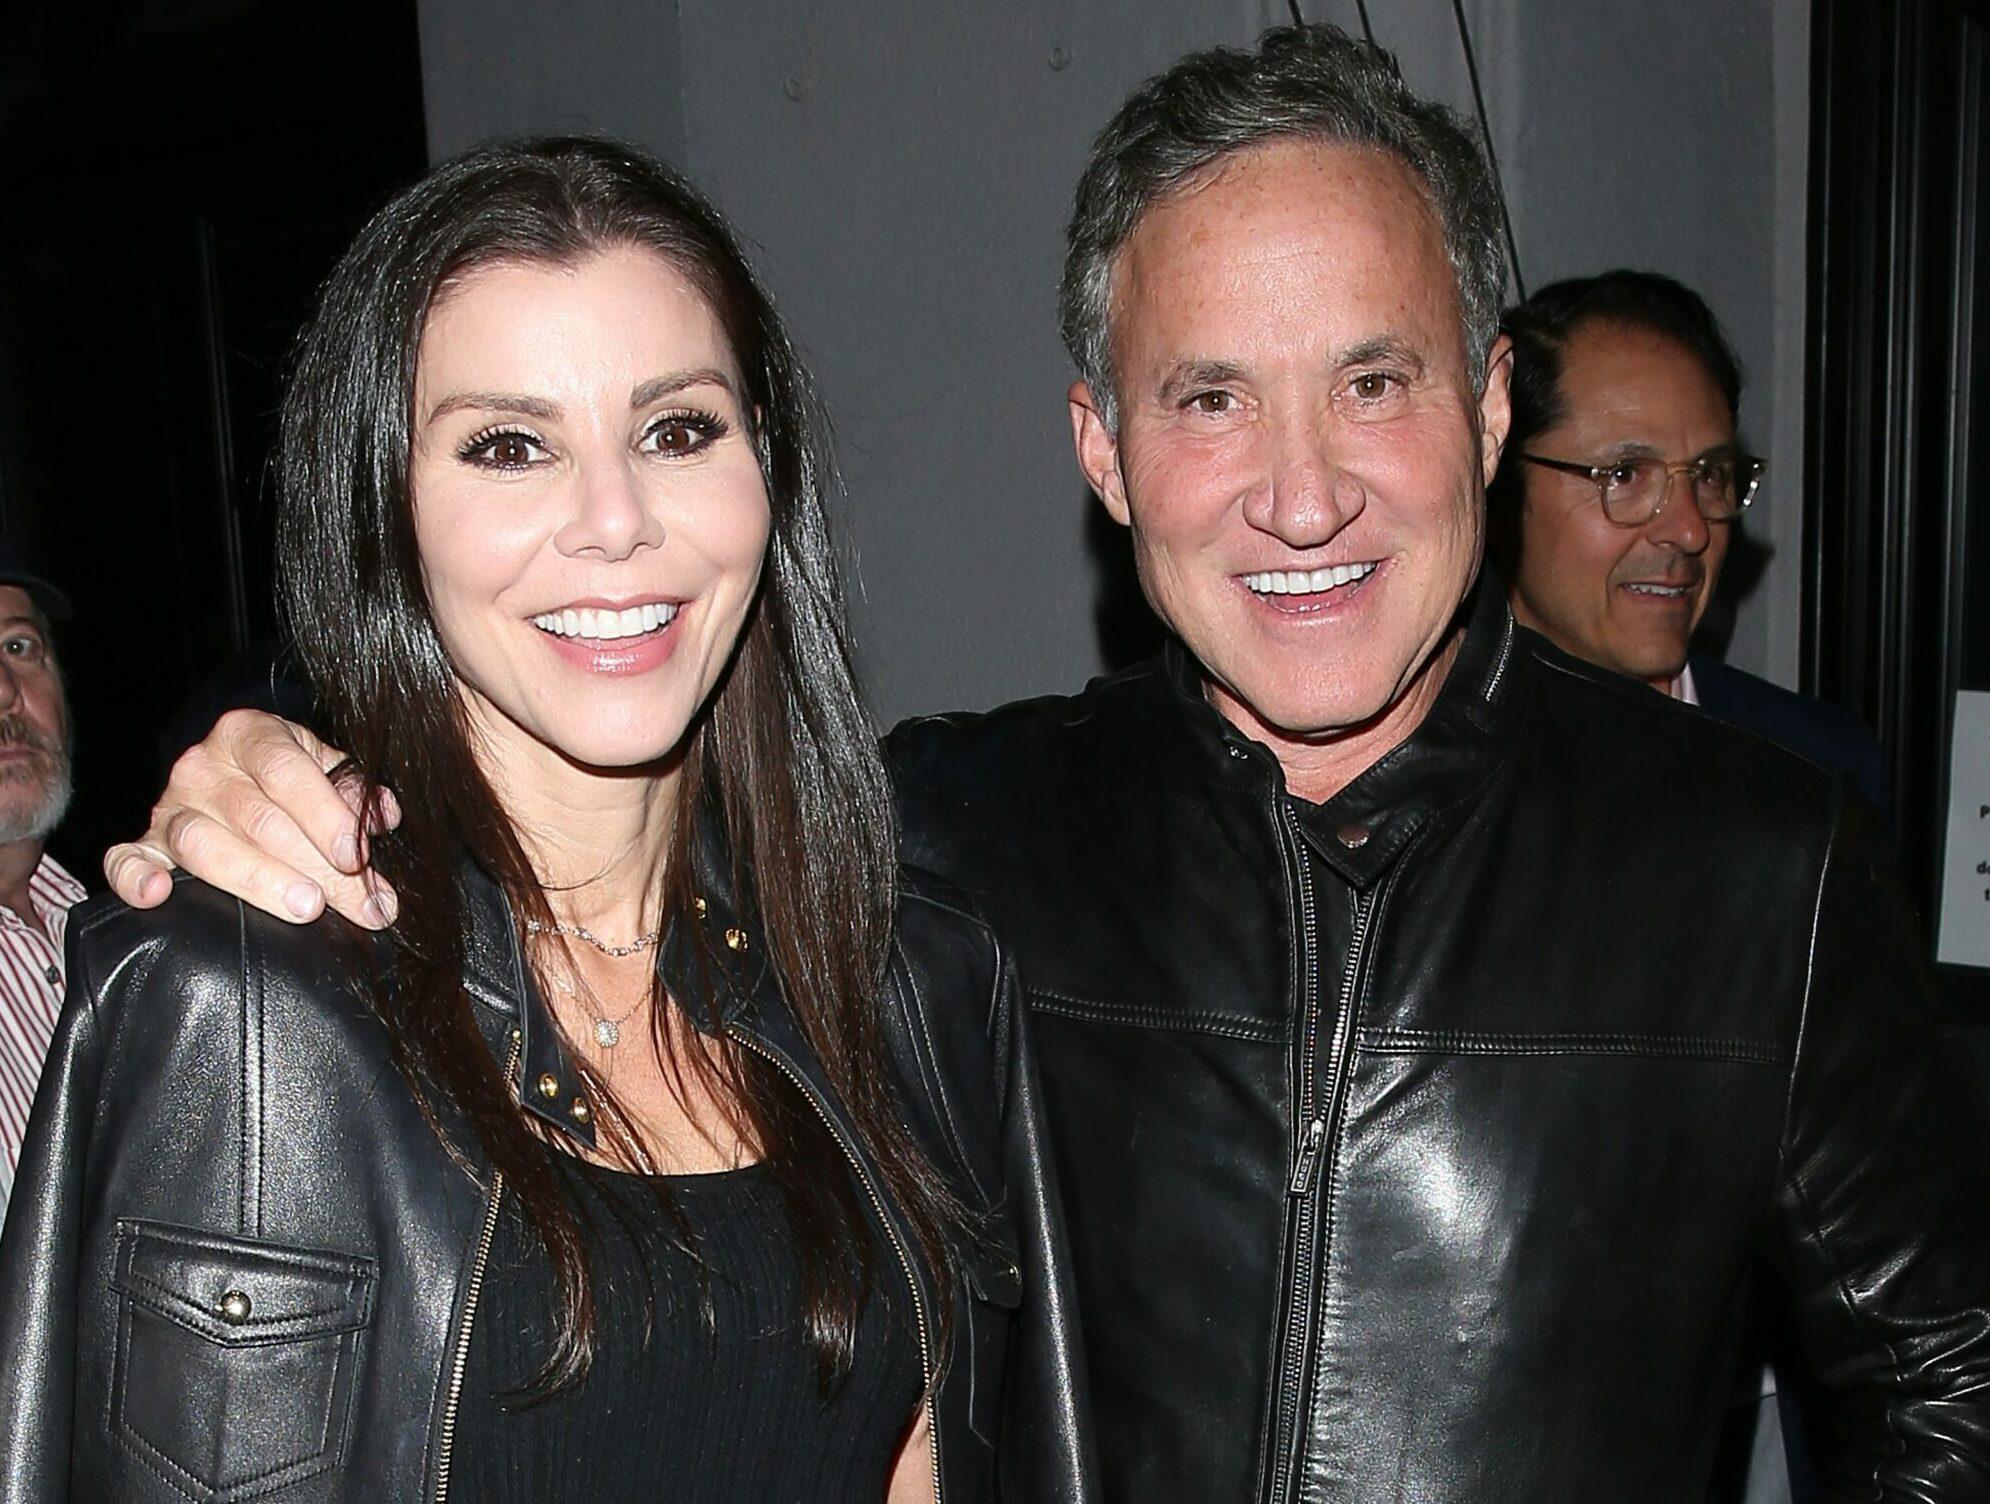 'Botched' Star, Terry Dubrow and his 'Real Housewives of Orange County' star Wife Heather Dubrow